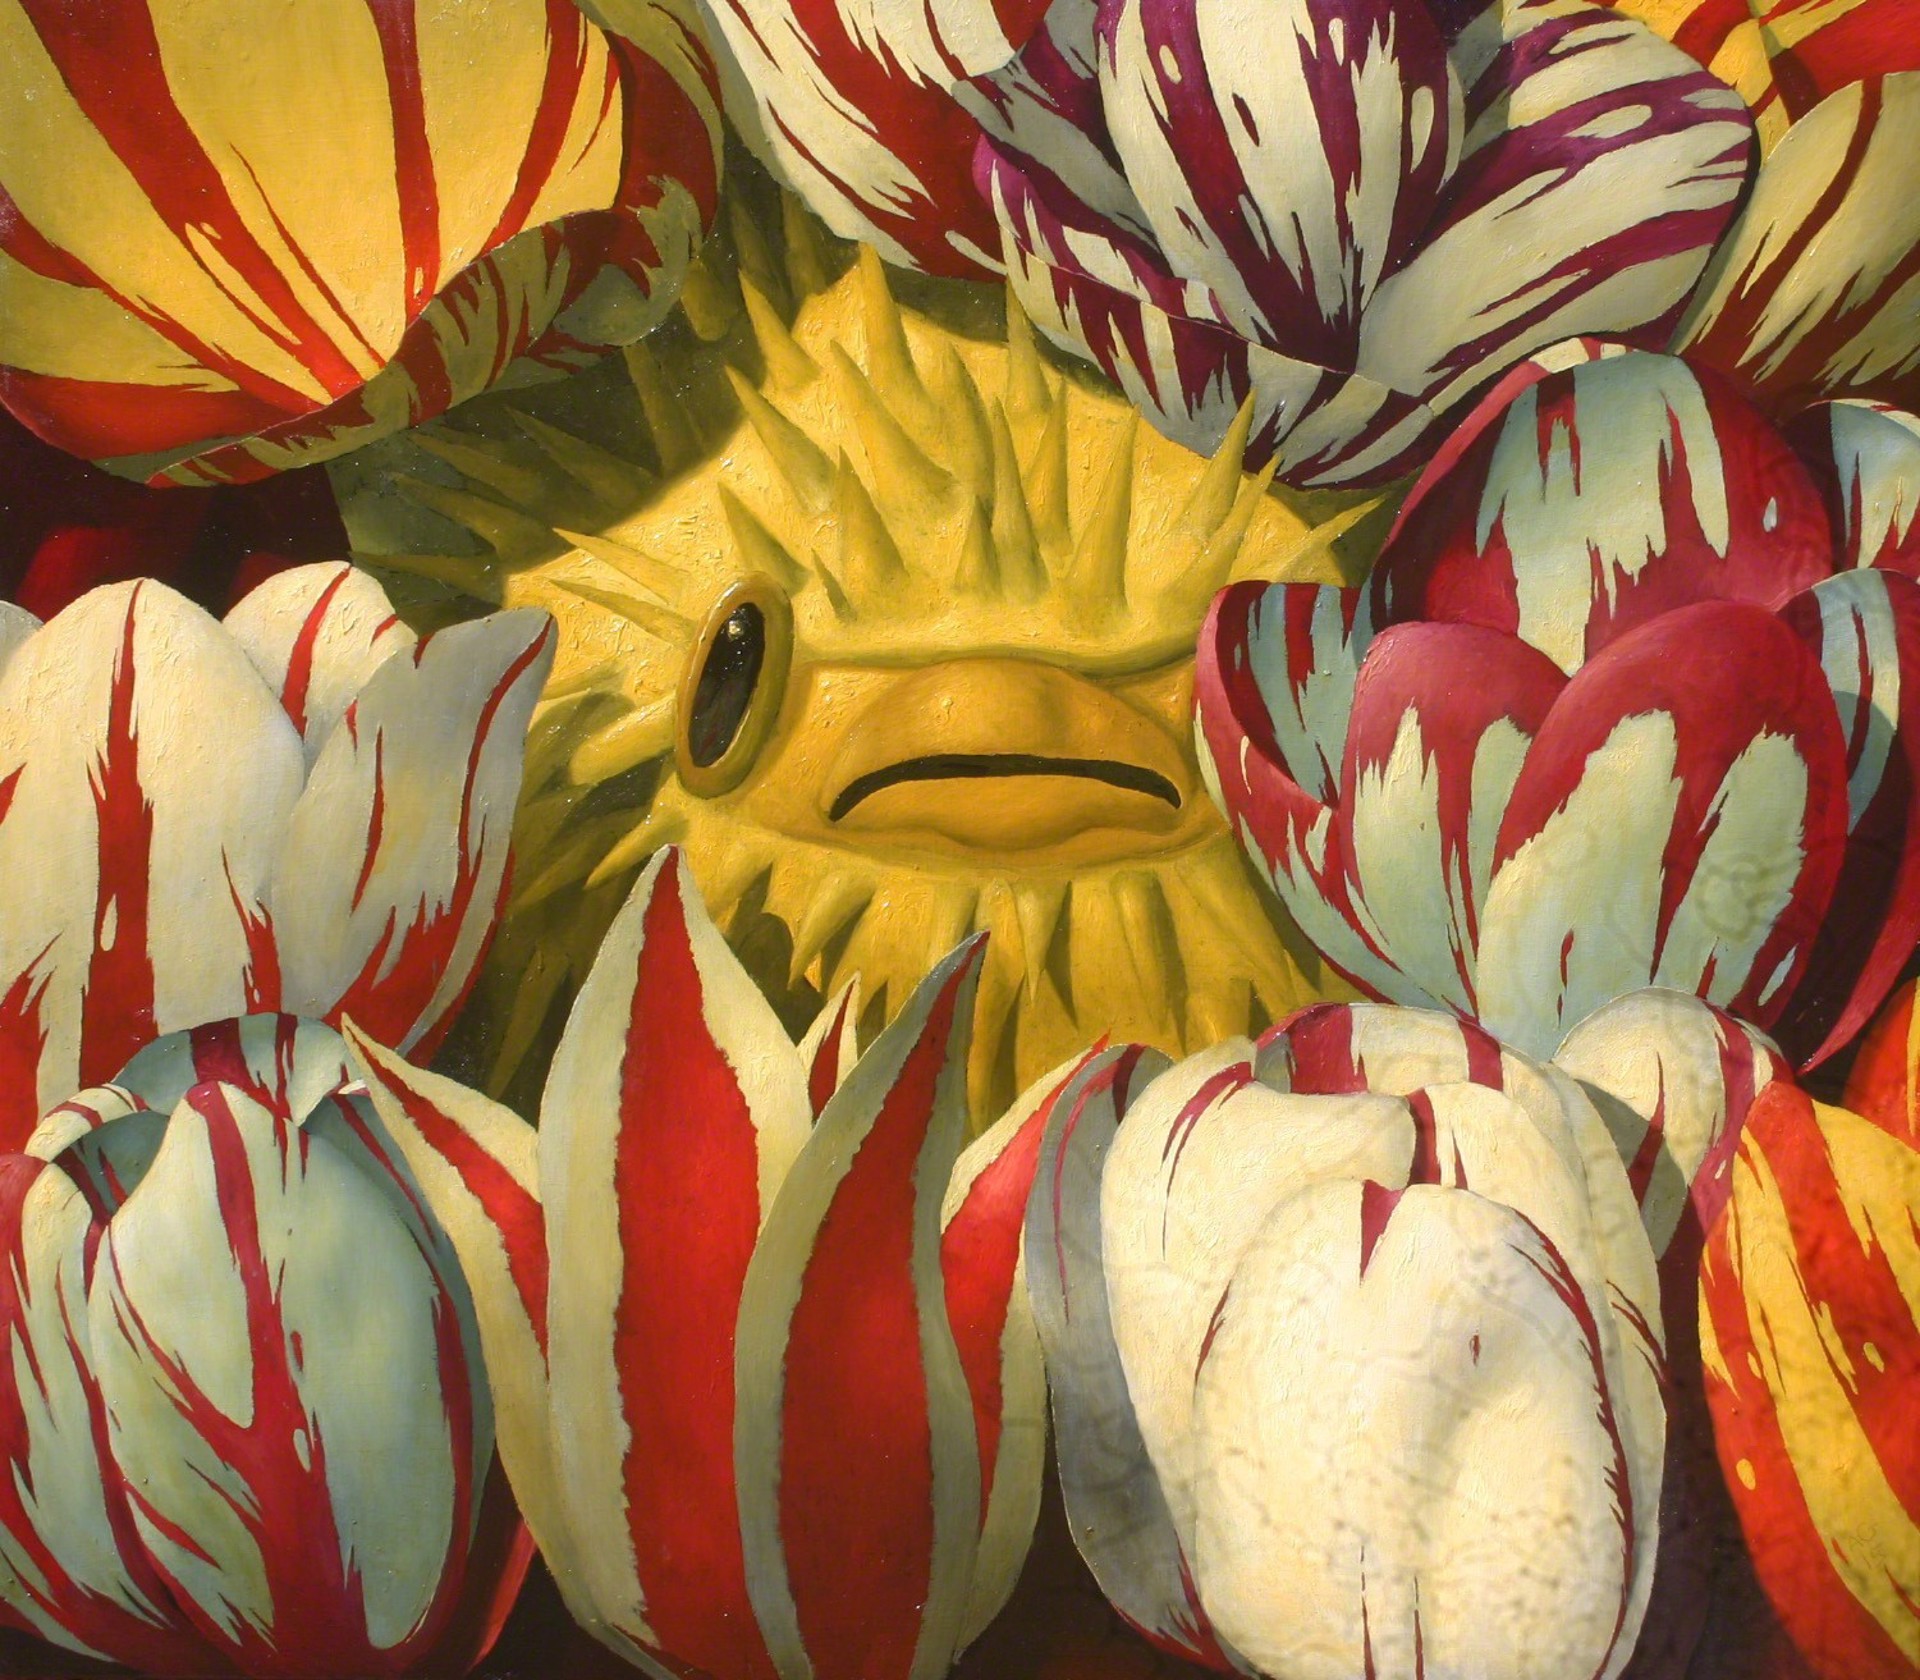 Pufferfish and Tulips by Alan Gerson